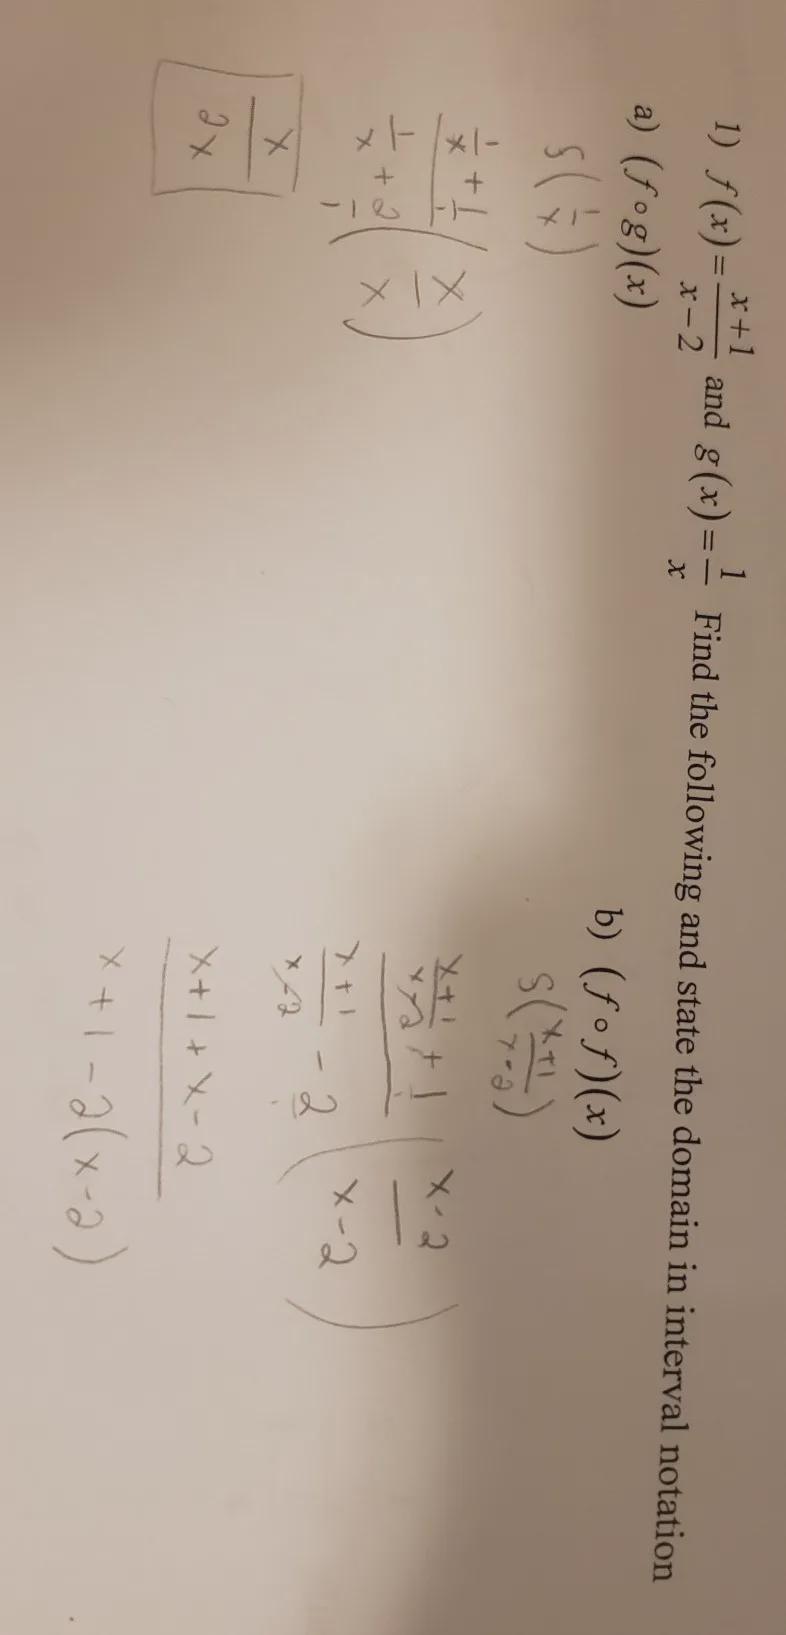 This Is Factor By Grouping. Did I Do 1a Right And How Do I Continue On 1b